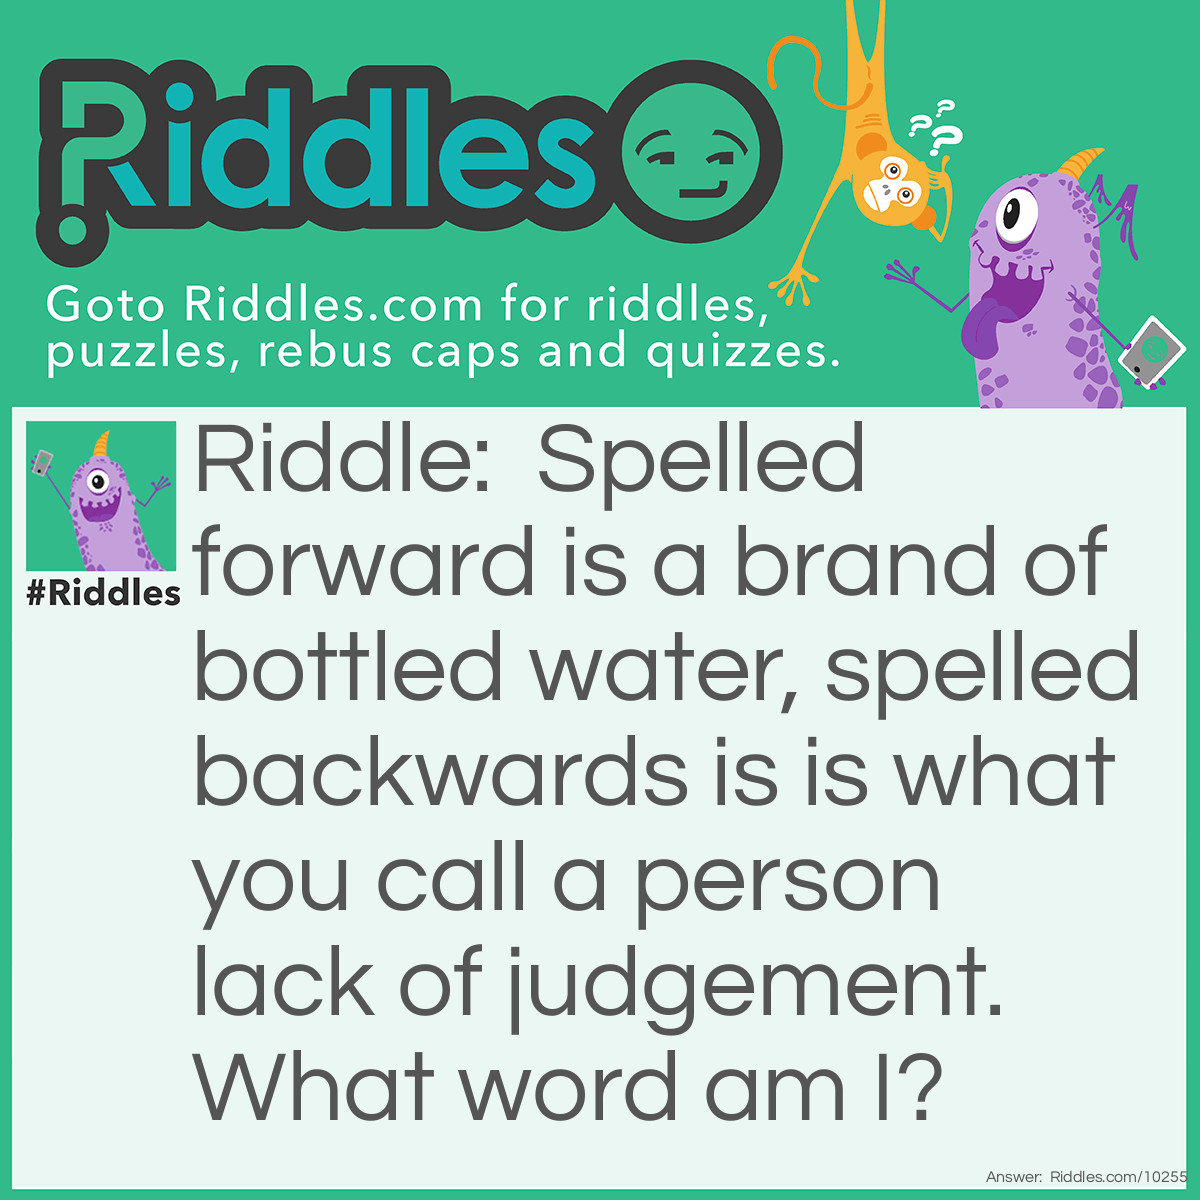 Riddle: Spelled forward is a brand of bottled water, spelled backwards is is what you call a person lack of judgement. What word am I? Answer: Evian, naive.